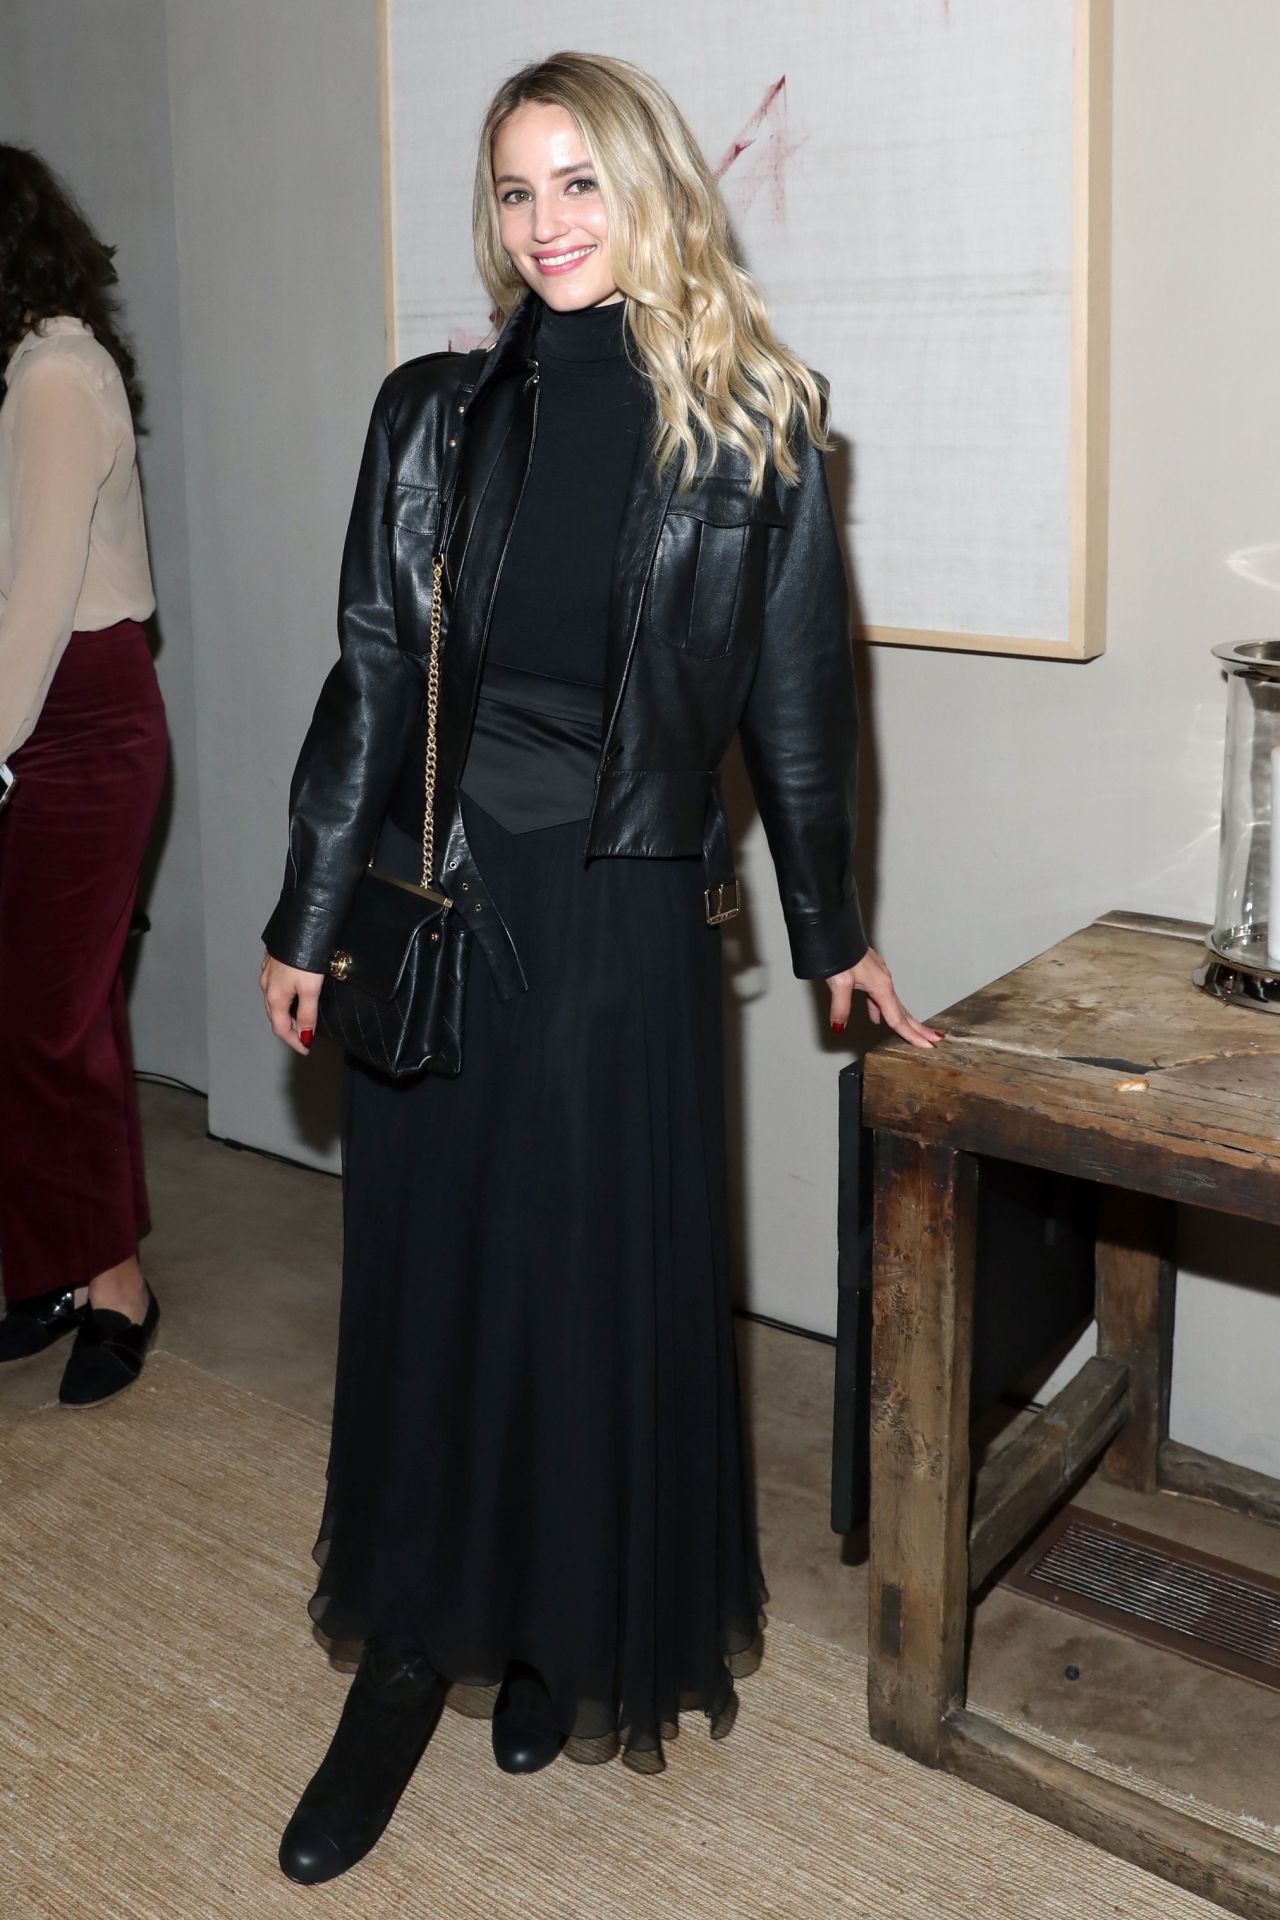 dianna-agron-through-her-lens-the-tribeca-chanel-women-s-filmmaker-event-in-nyc-10-18-2018-5.jpg